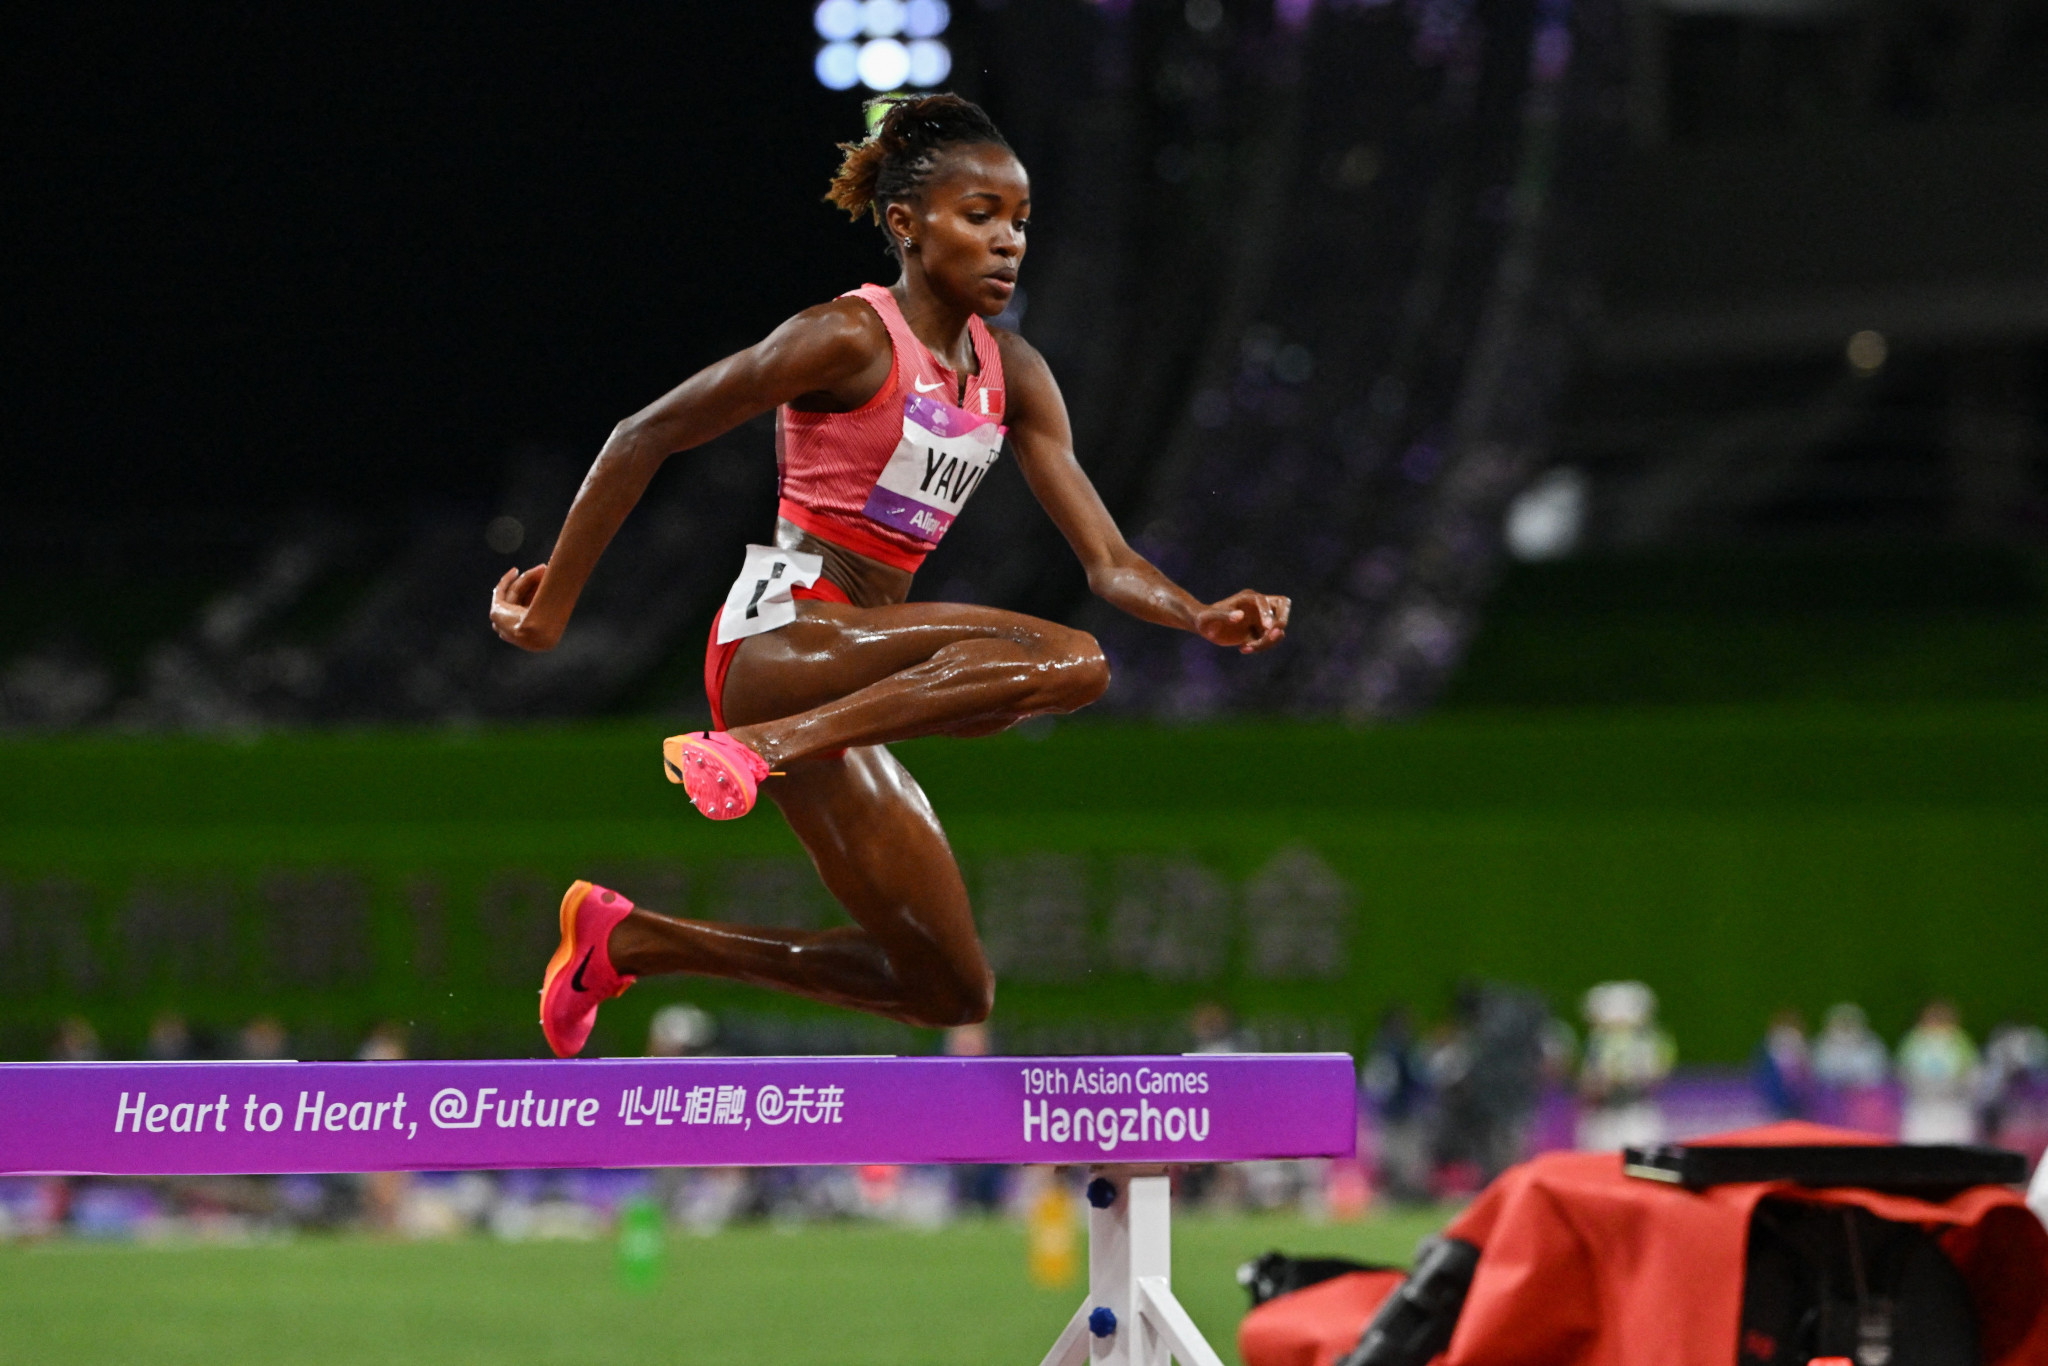 World champion Winfred Yavi of Bahrain retained her women's 3,000m steeplechase title in an Asian Games record time of 9:18.28 ©Getty Images